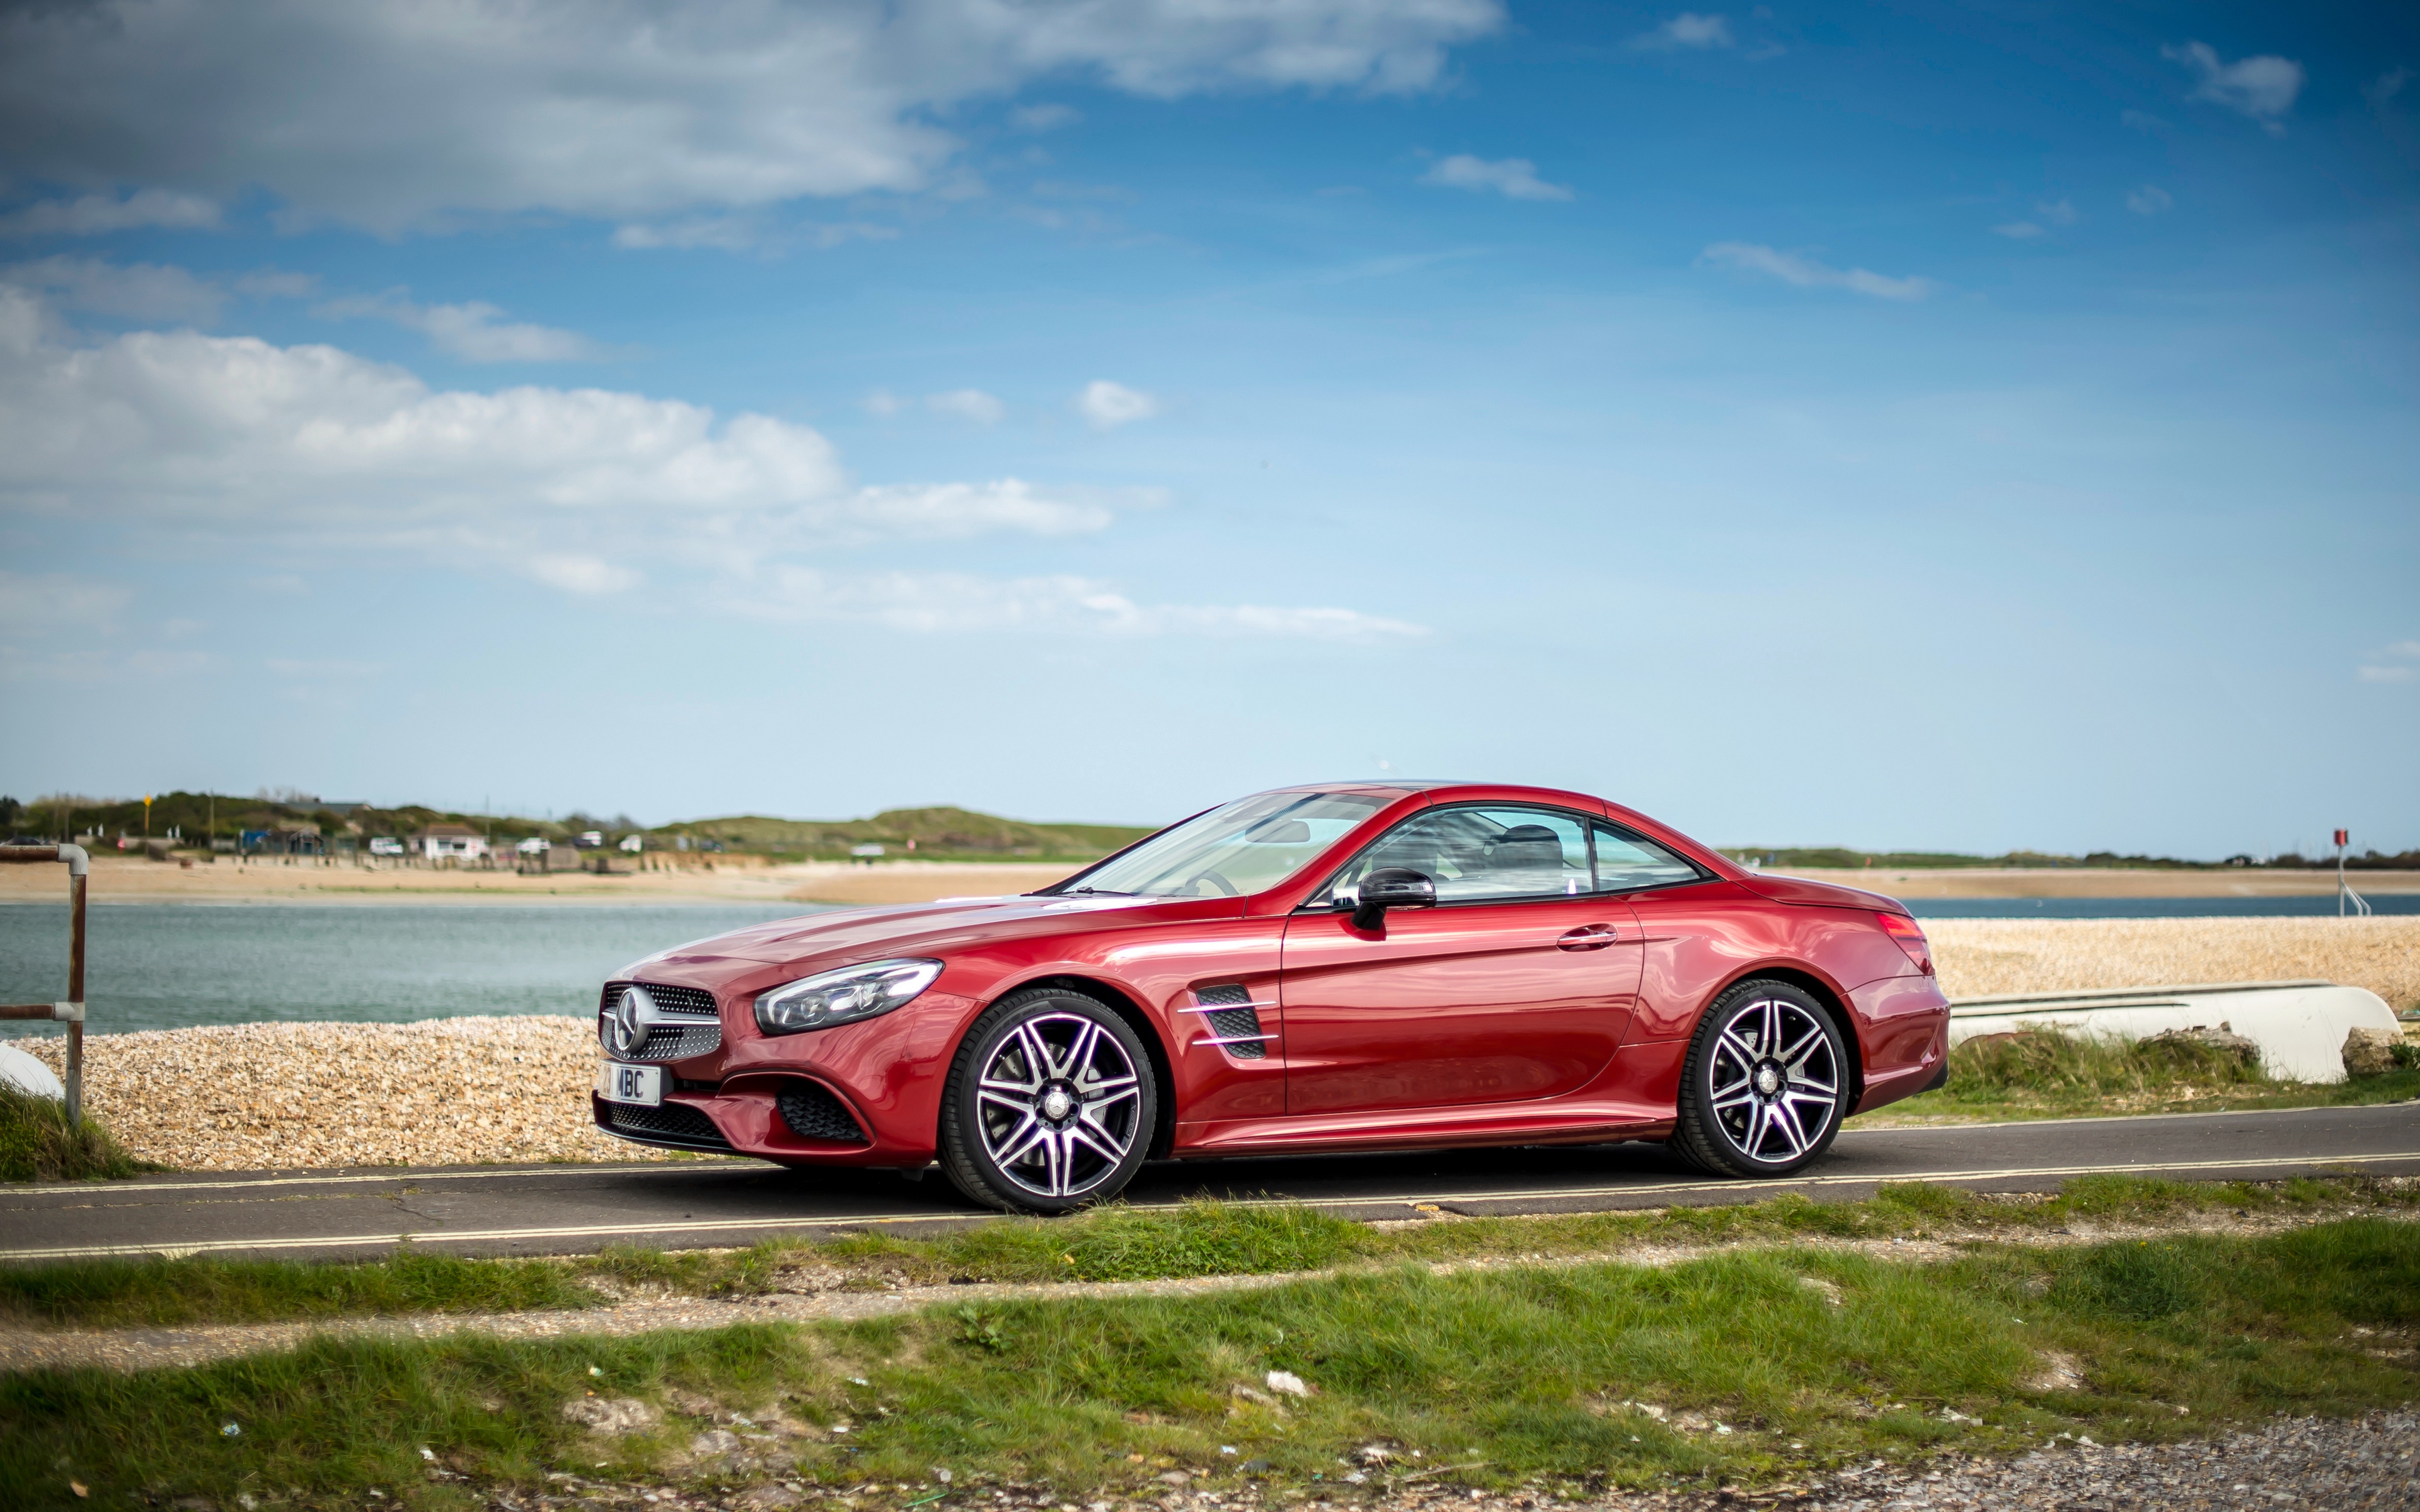 General 3840x2400 car red cars outdoors vehicle Mercedes-Benz German cars